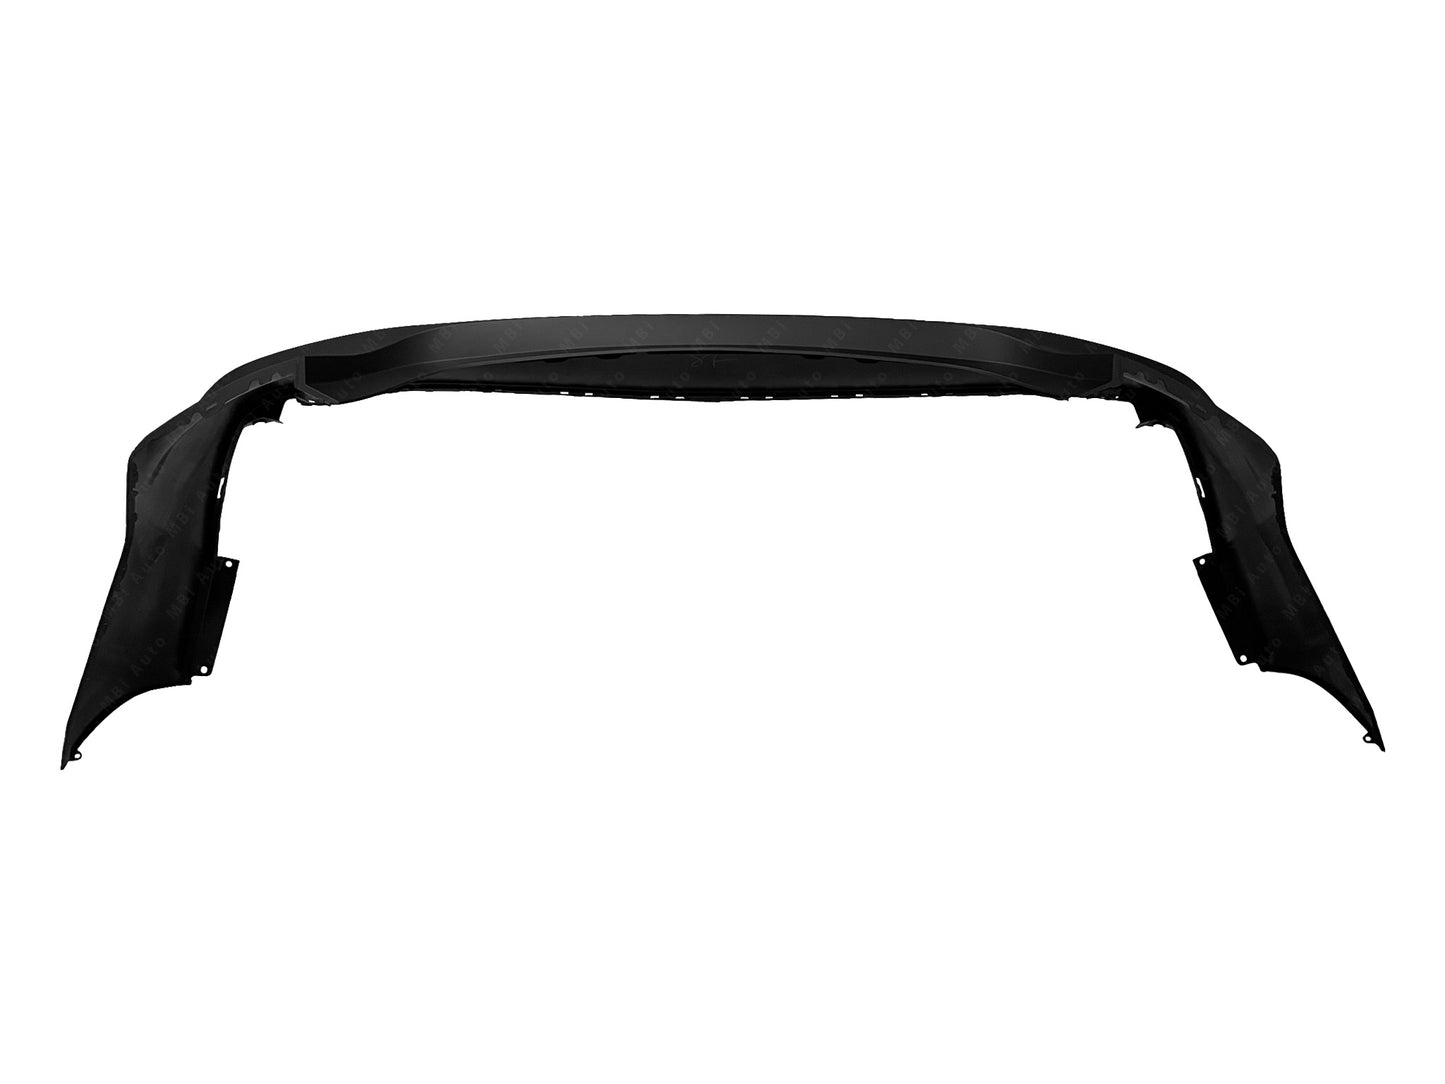 Toyota Camry 2018 - 2023 Rear Bumper Cover 18 - 23 TO1100333 Bumper King